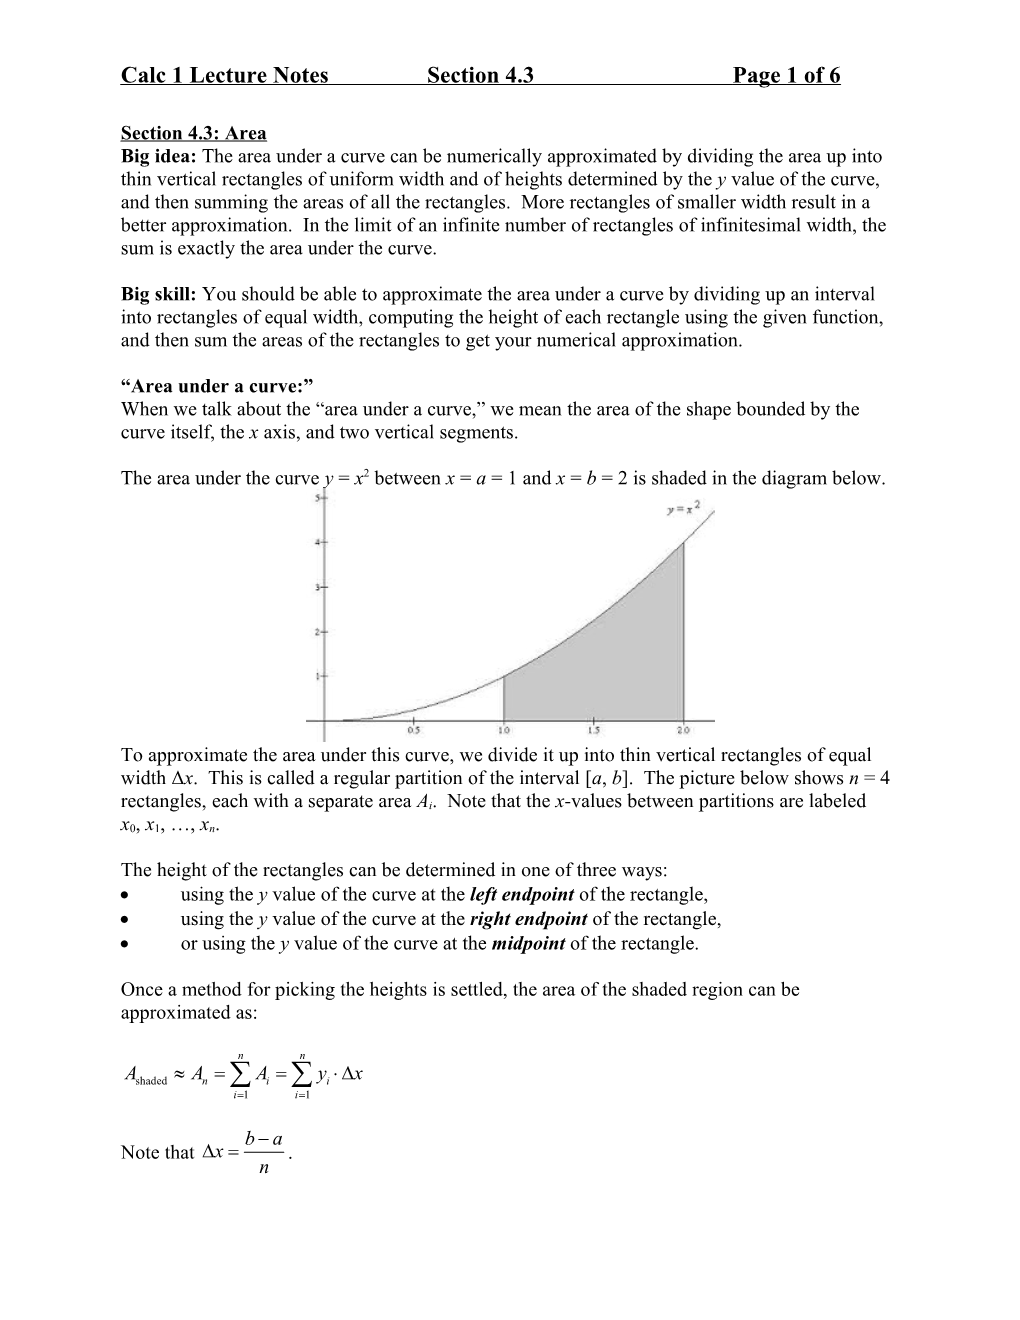 Calculus 1 Lecture Notes, Section 4.3